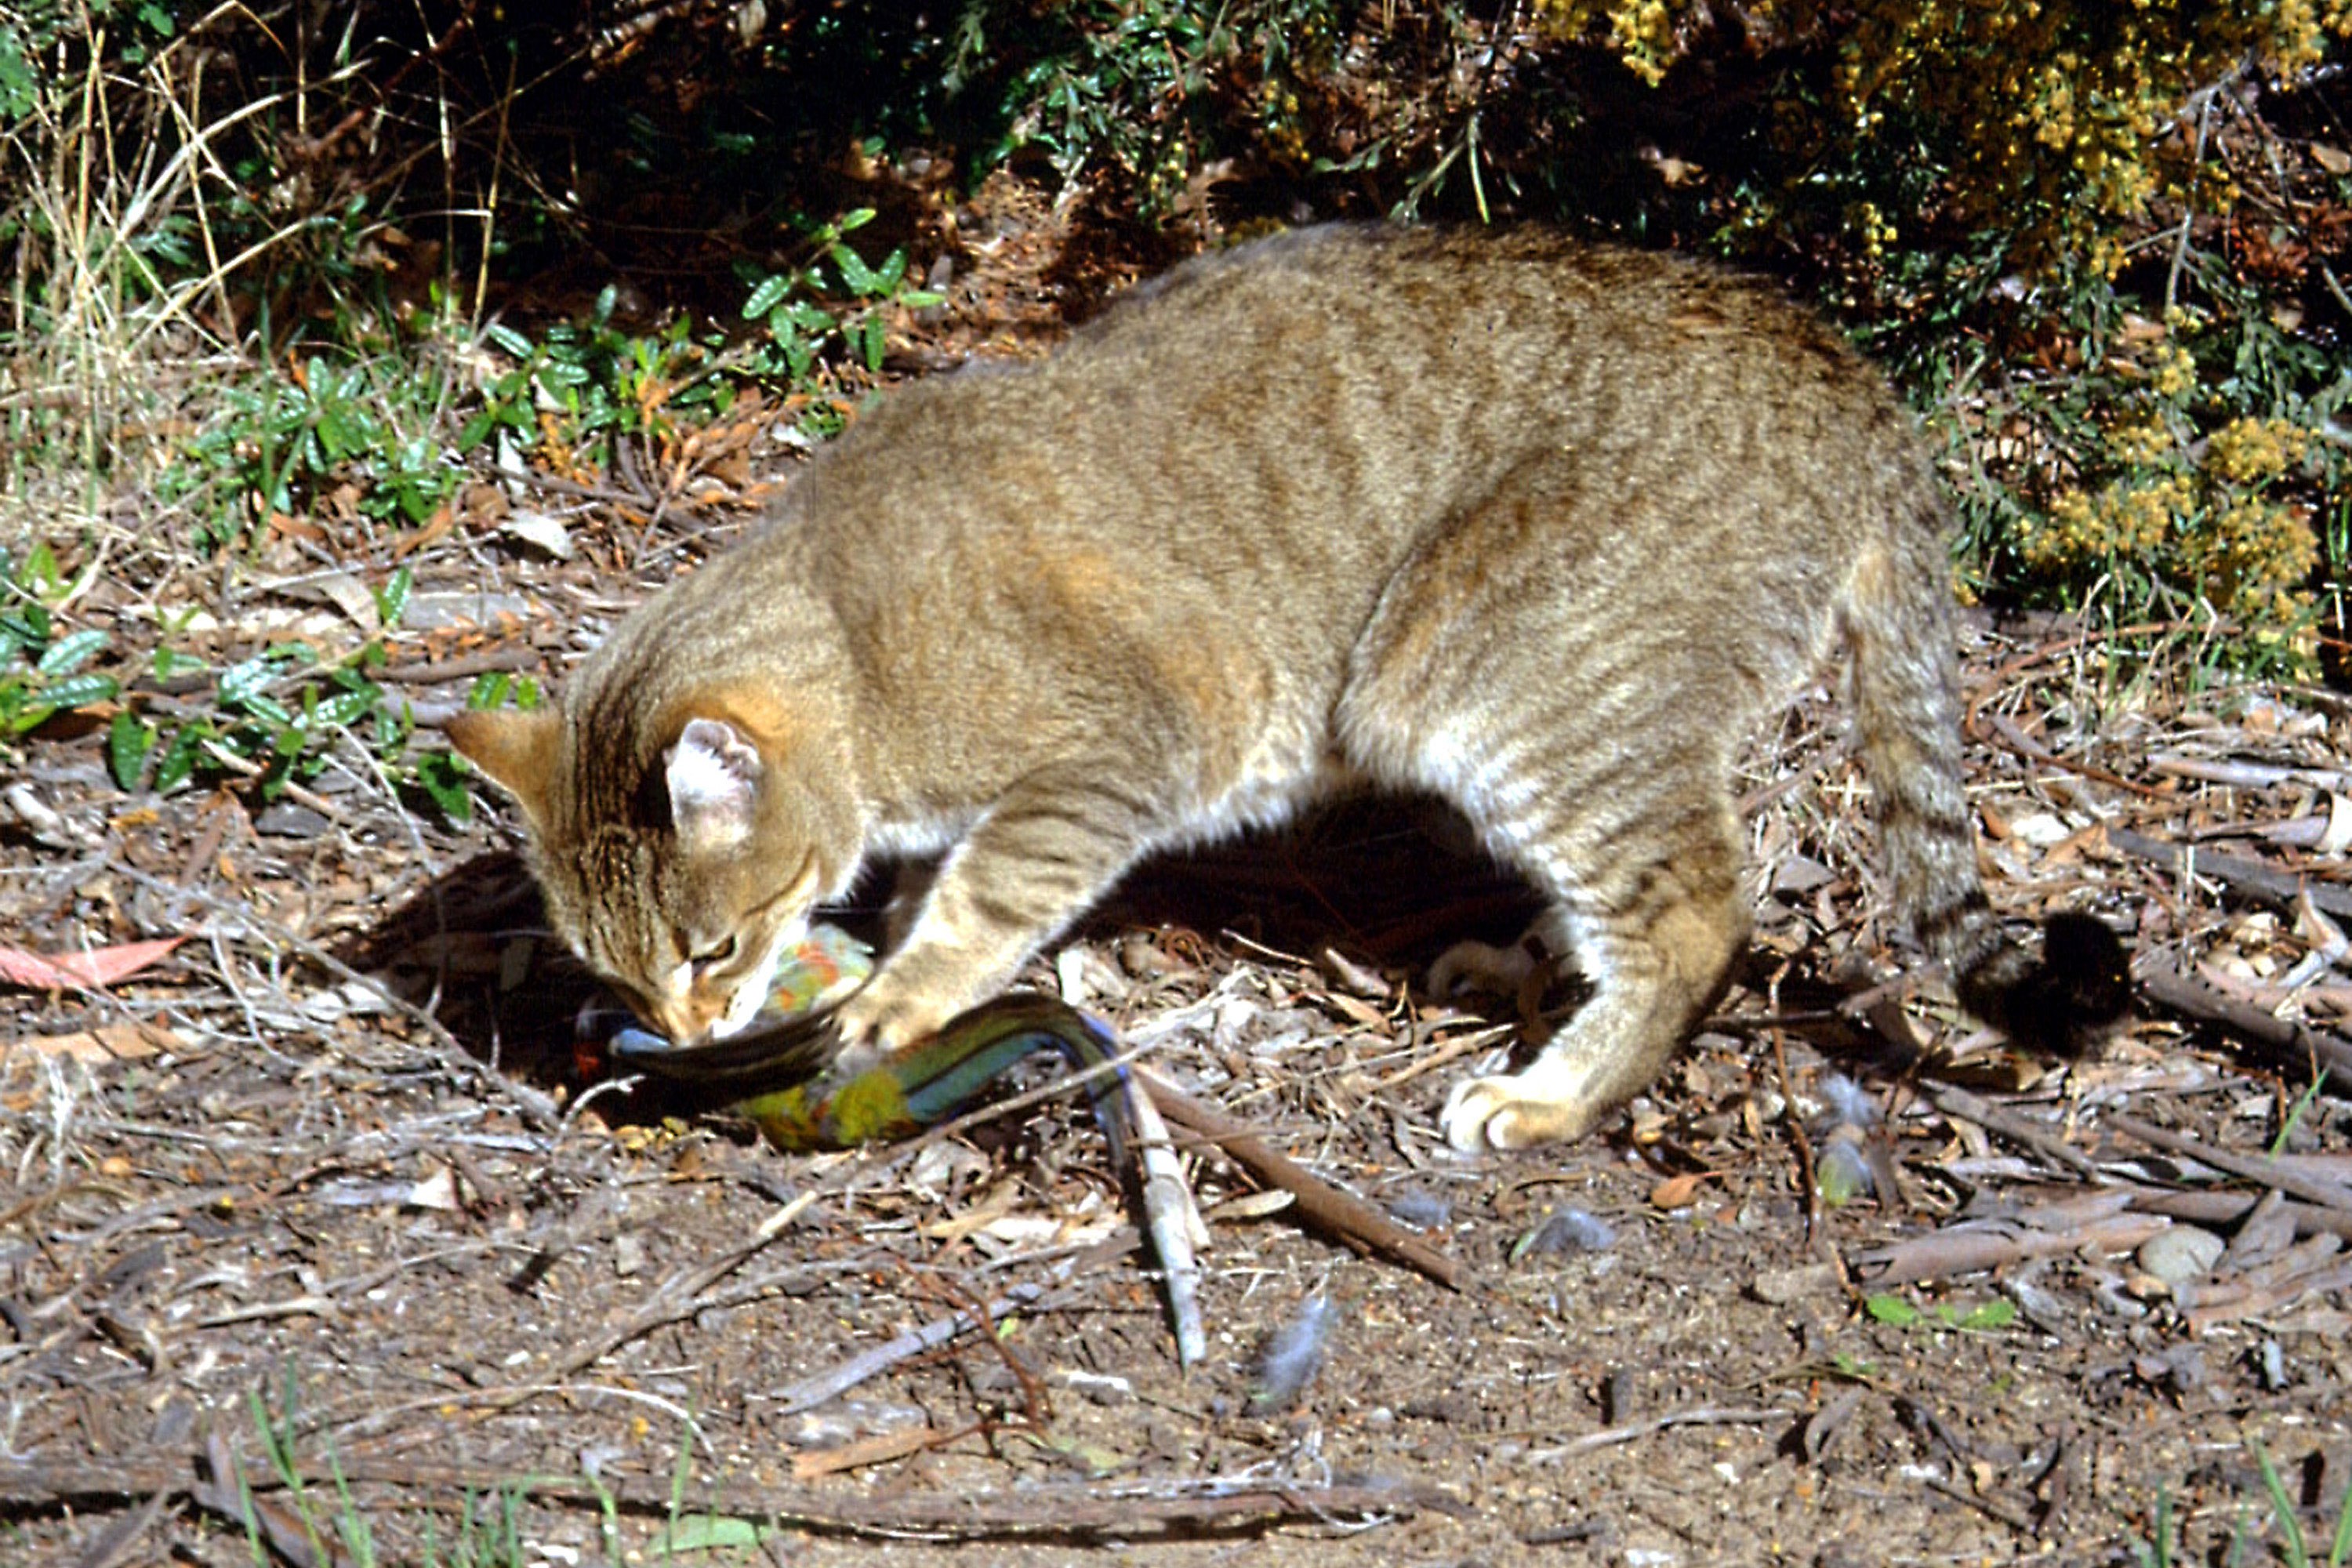 Australia is overrun with feral cats